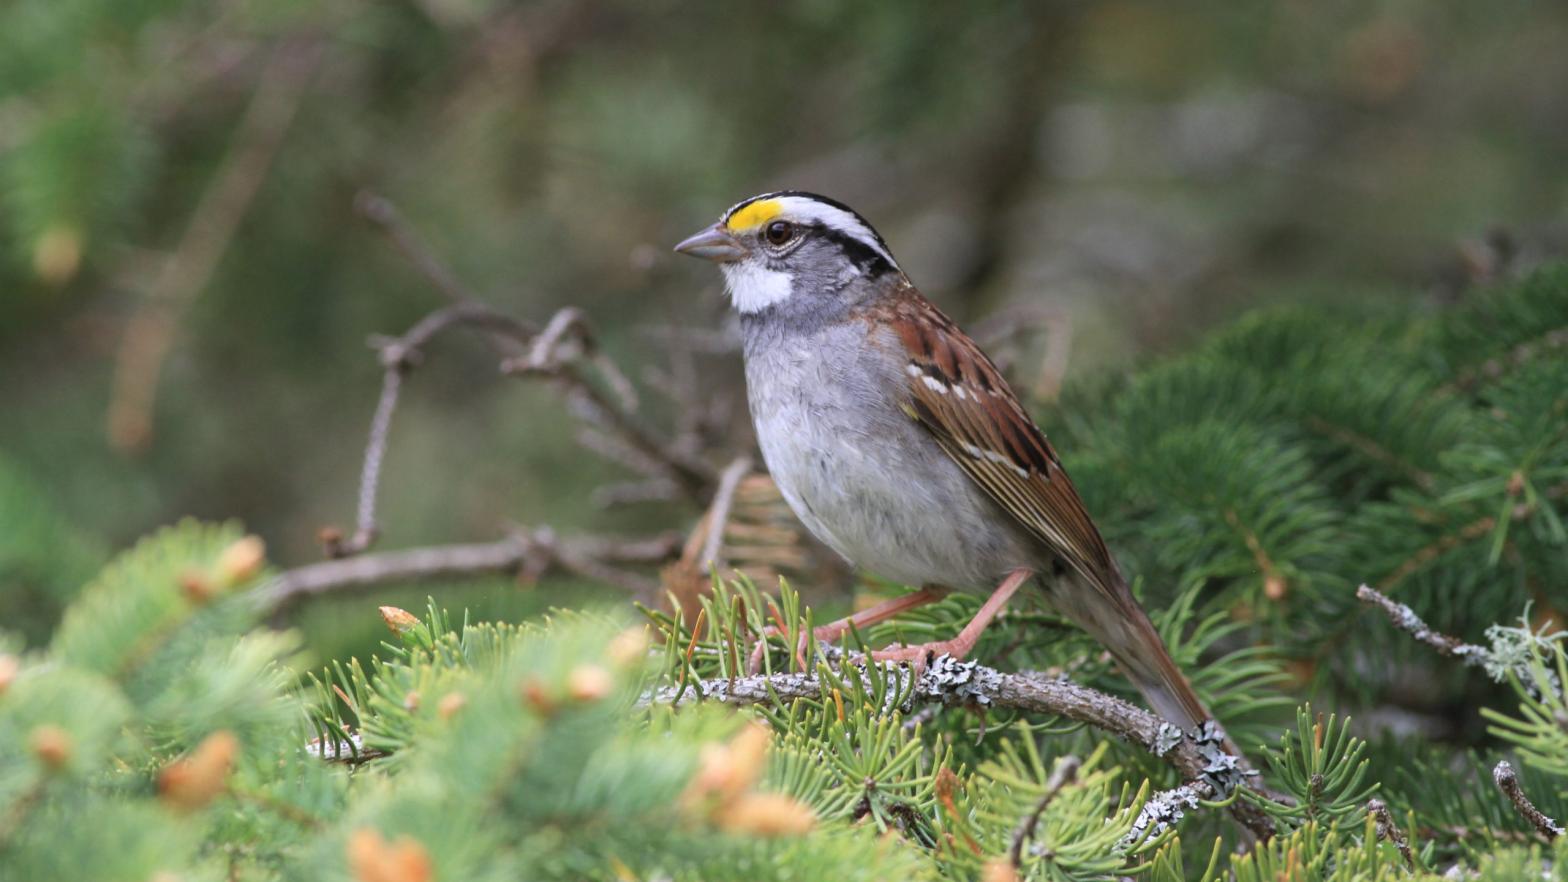 A white-throated sparrow.  (Image: Scott M. Ramsay)